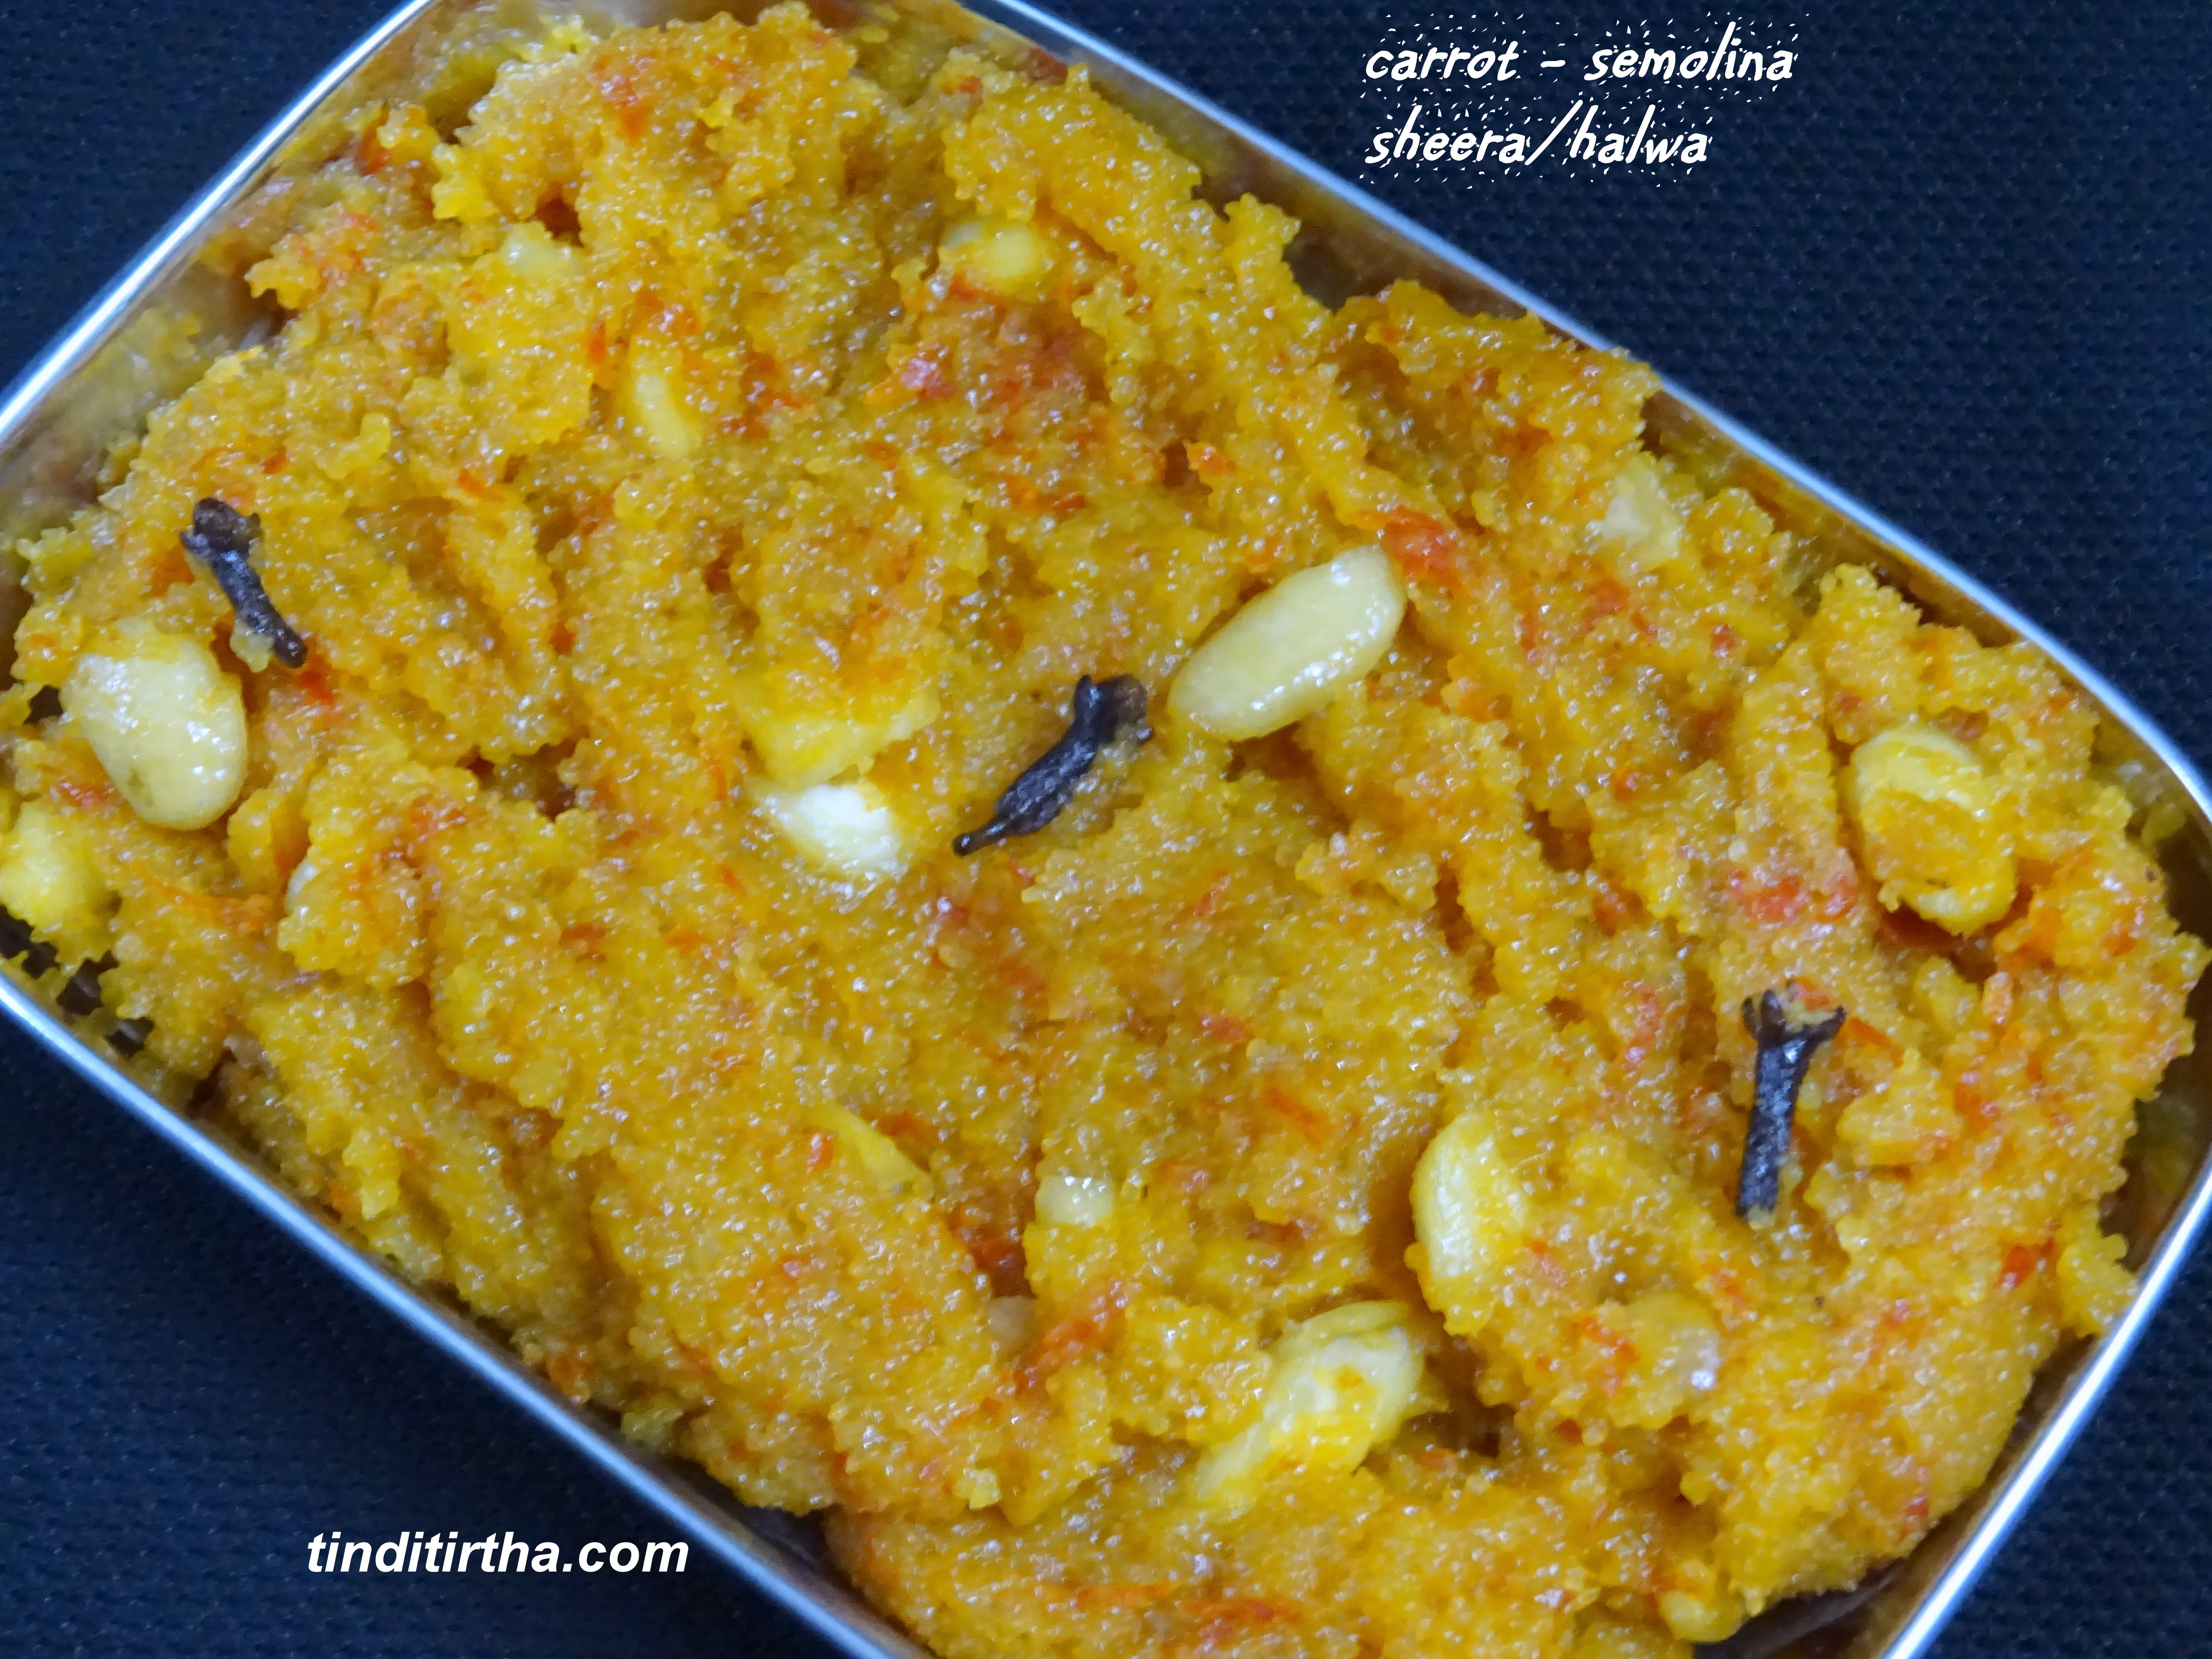 RED/WINTER CARROT SAJJIGE/SHEERA with the goodness of milk and jaggery